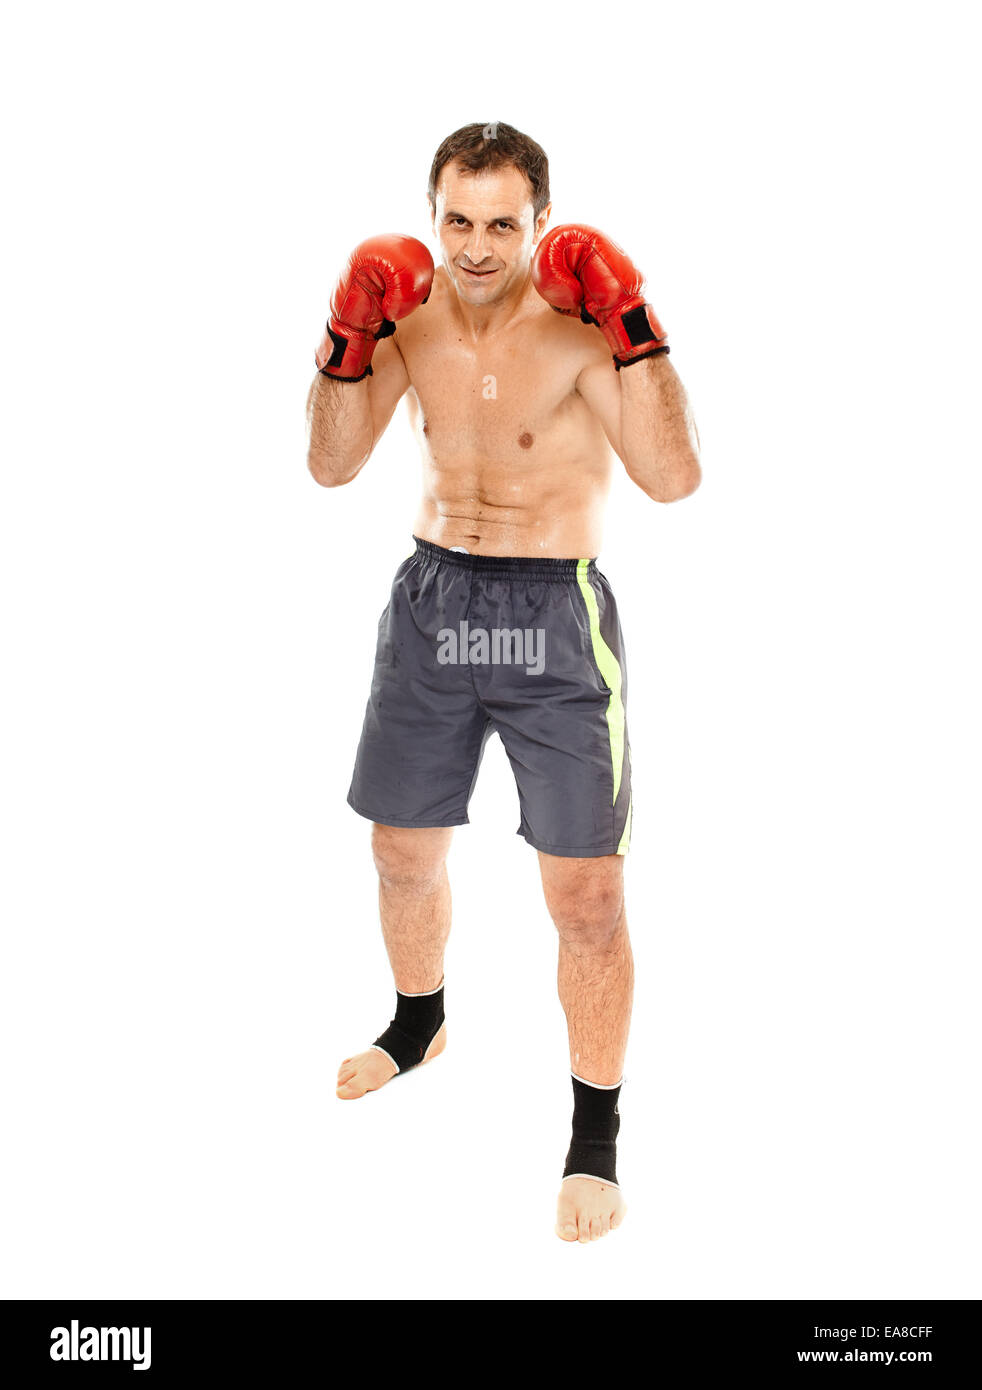 Kickbox or muay thai fighter in guard stance isolated on white background  Stock Photo - Alamy